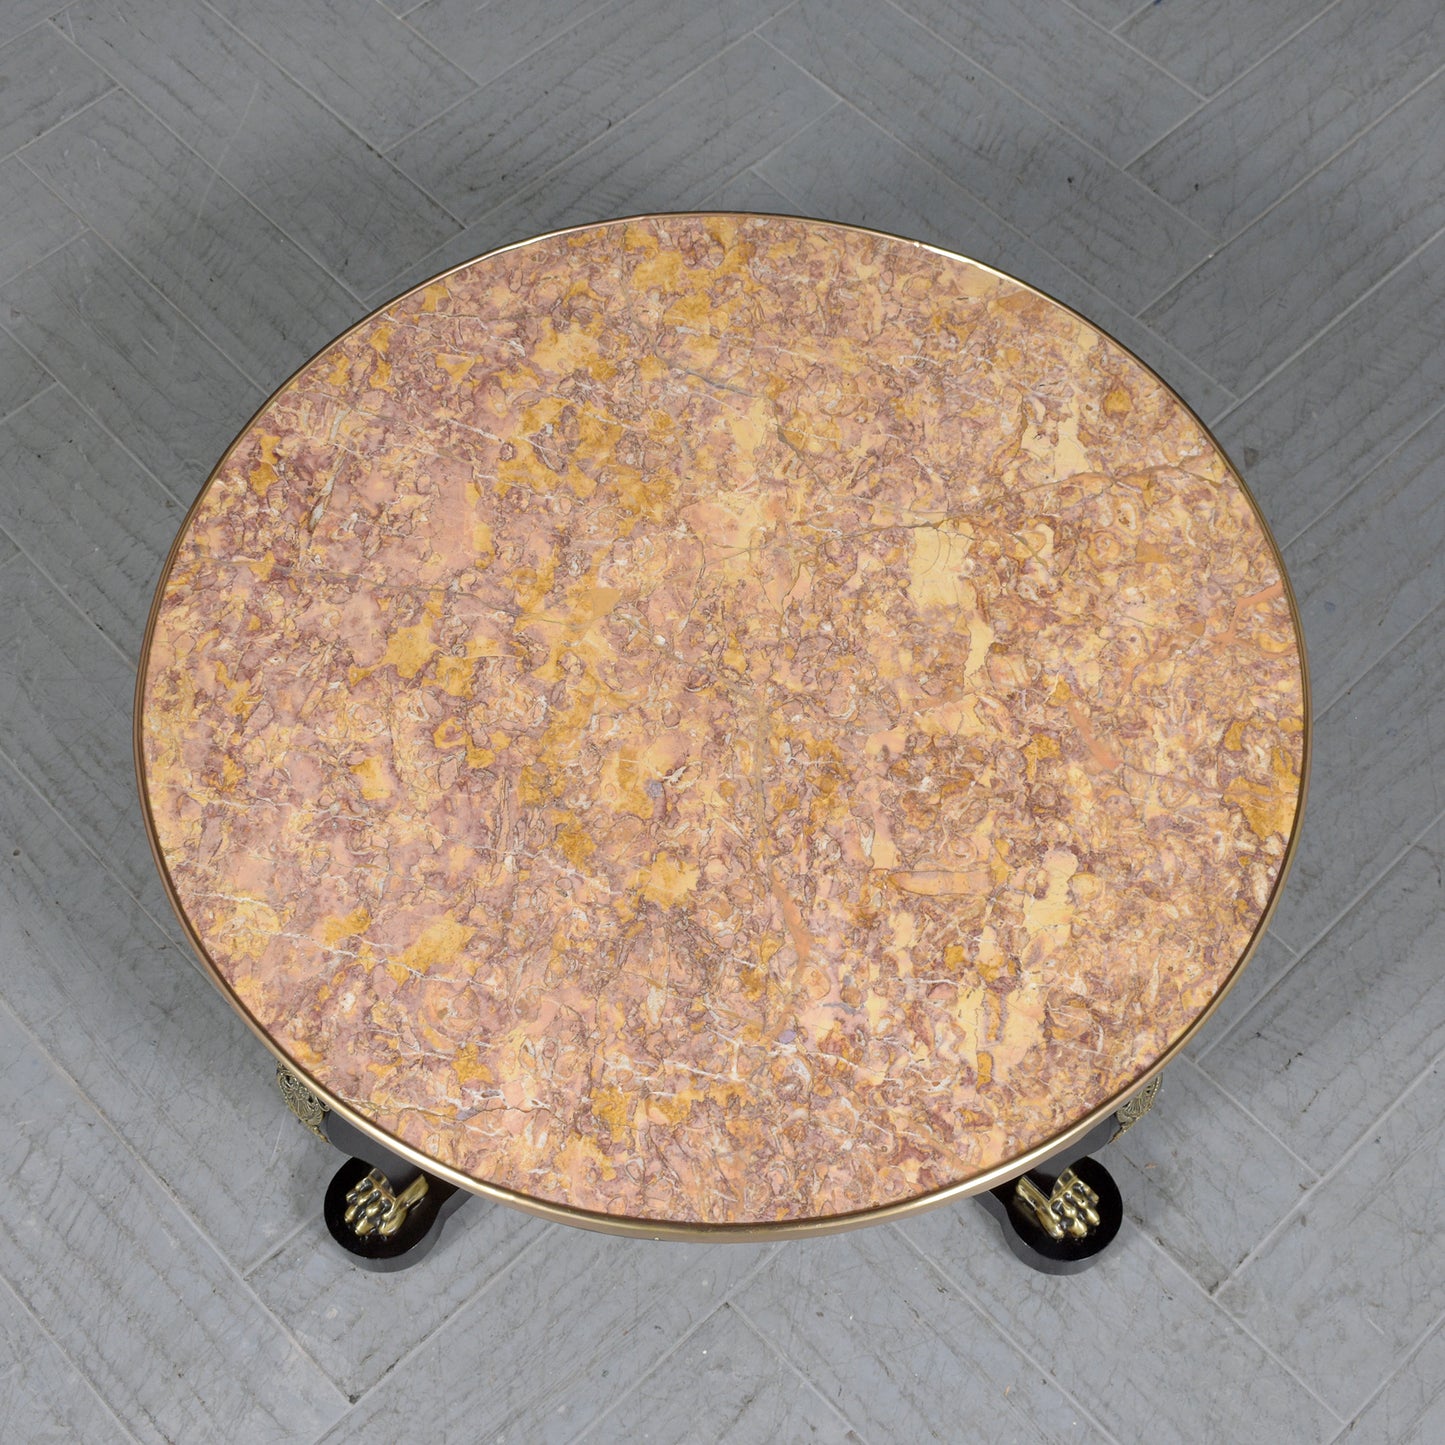 1880s Empire Style Antique Coffee Table with Marble Top & Brass Accents